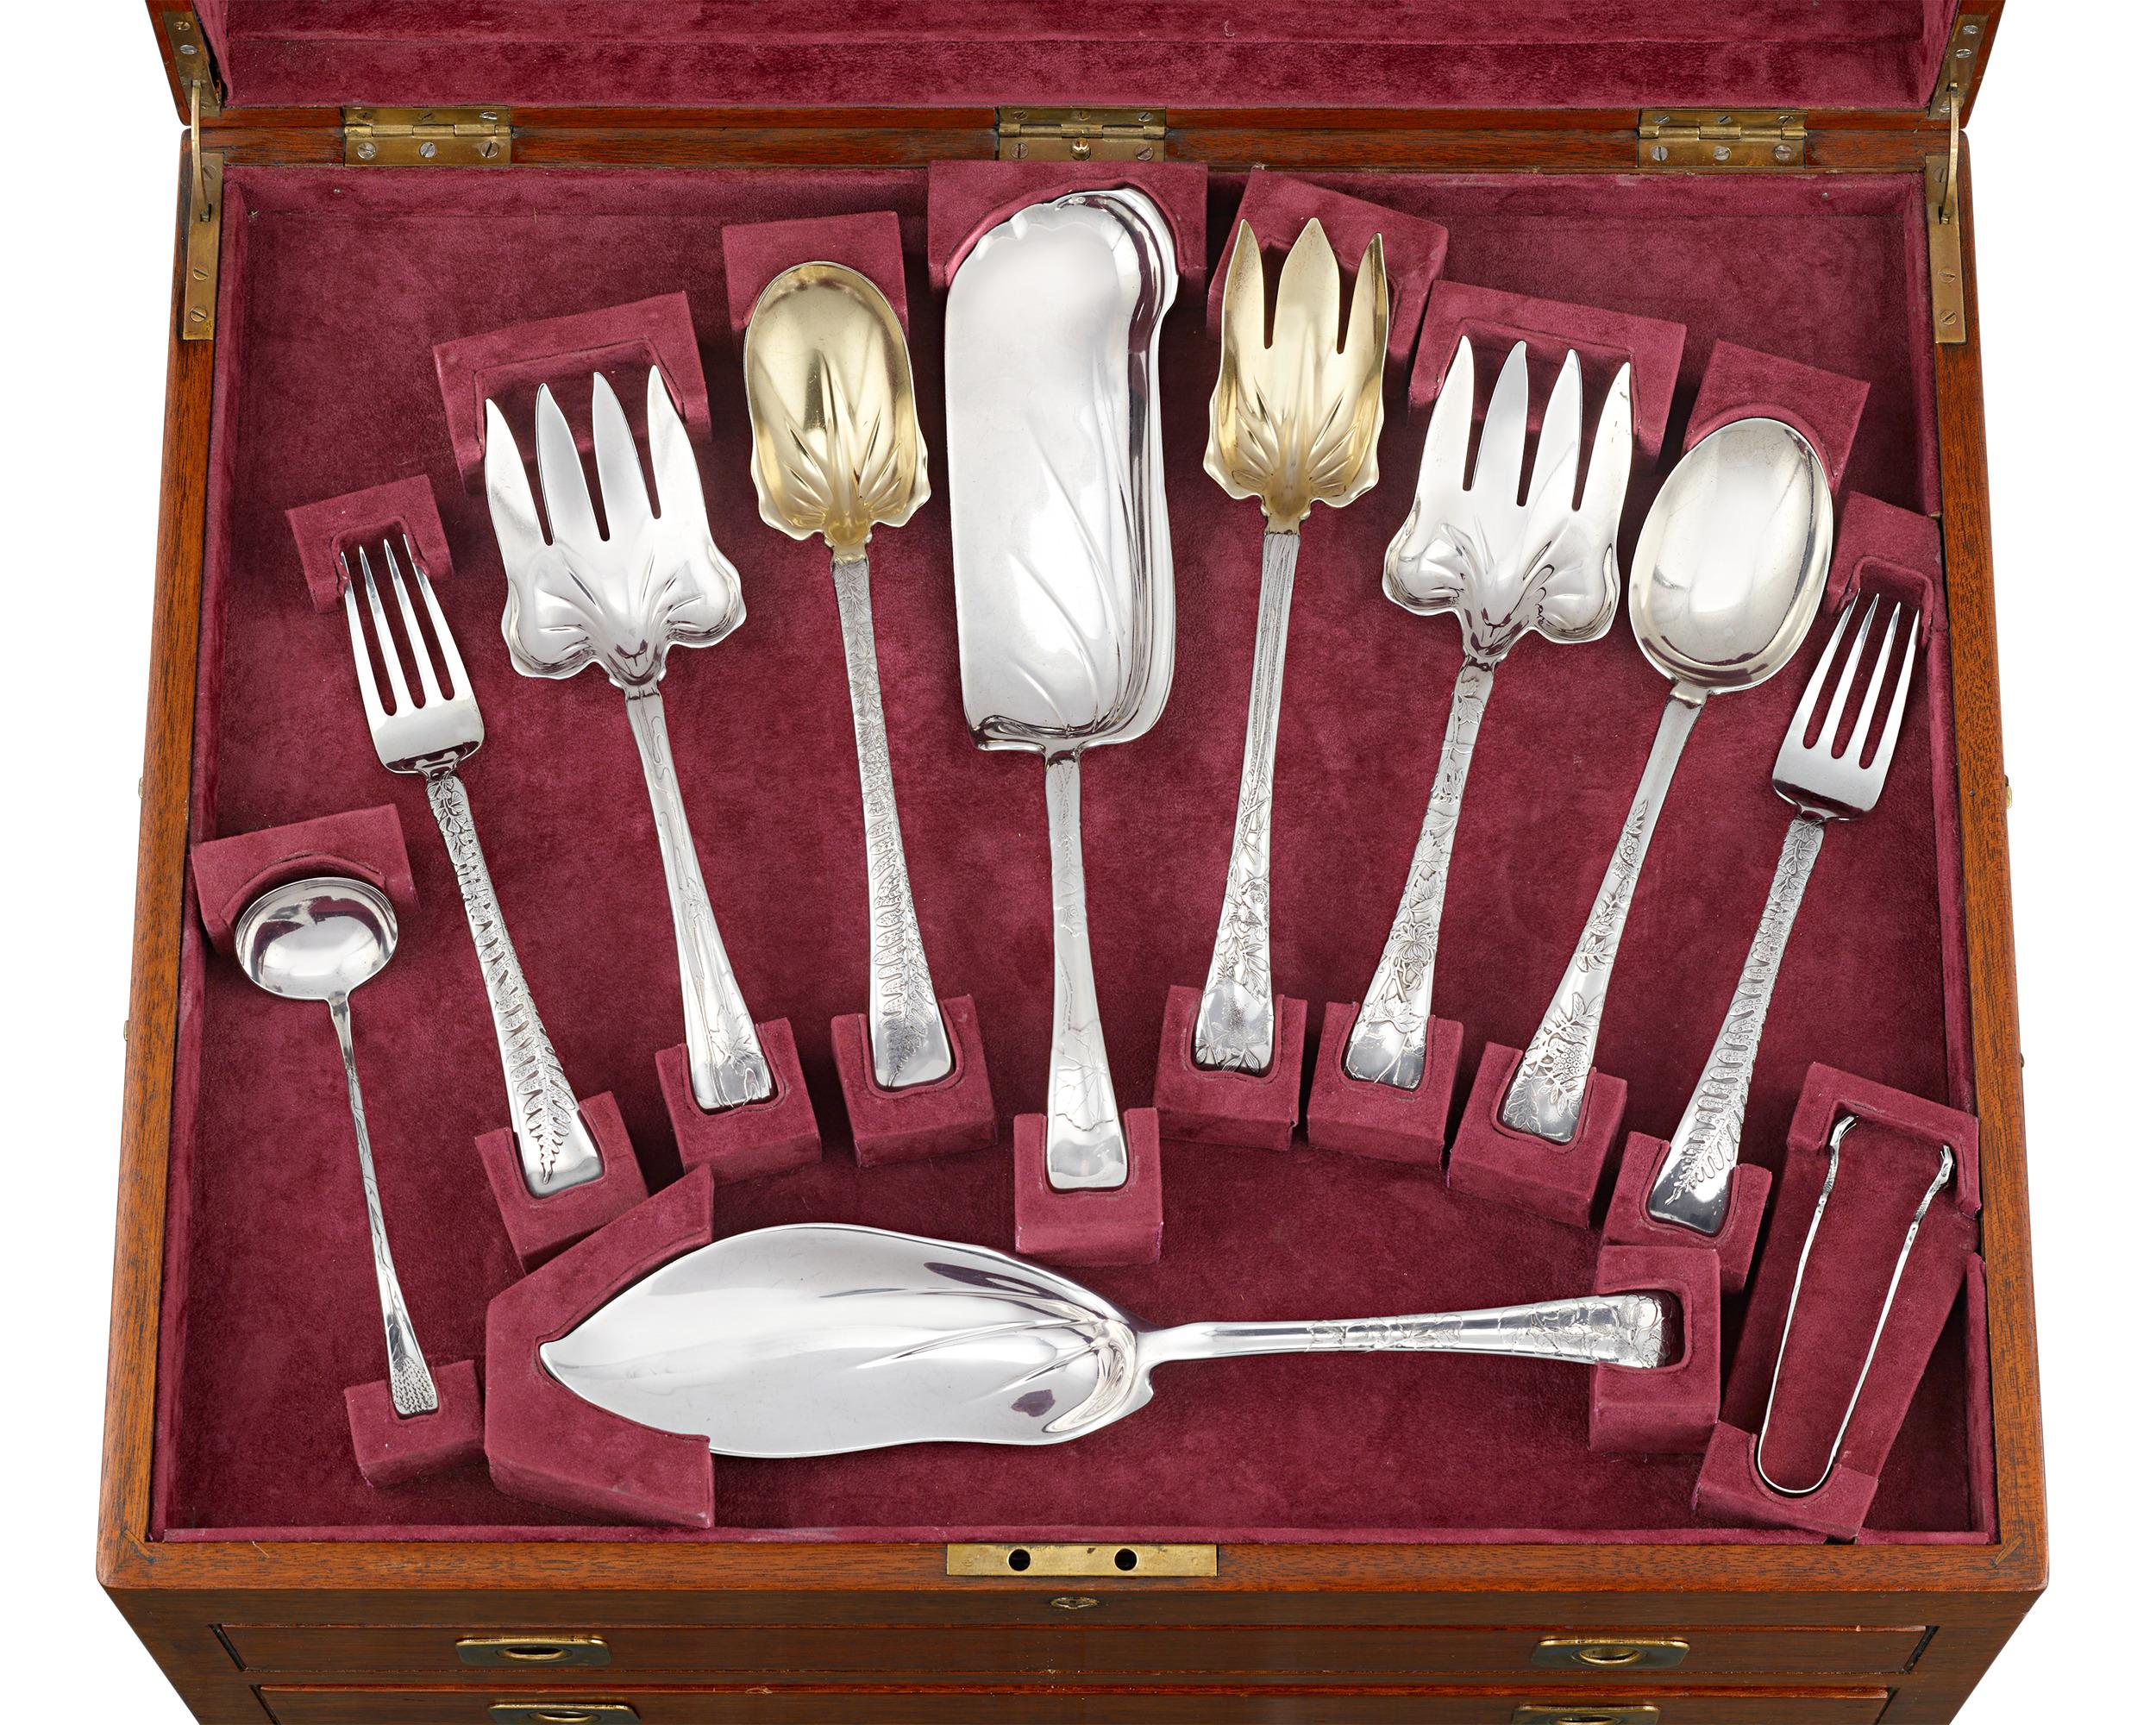 This monumental 248-piece sterling silver flatware service was crafted by the legendary Tiffany & Co. and features the exceptional Lap-Over Edge pattern. This intricate, nature-inspired pattern is widely regarded as one of the firm's most innovative